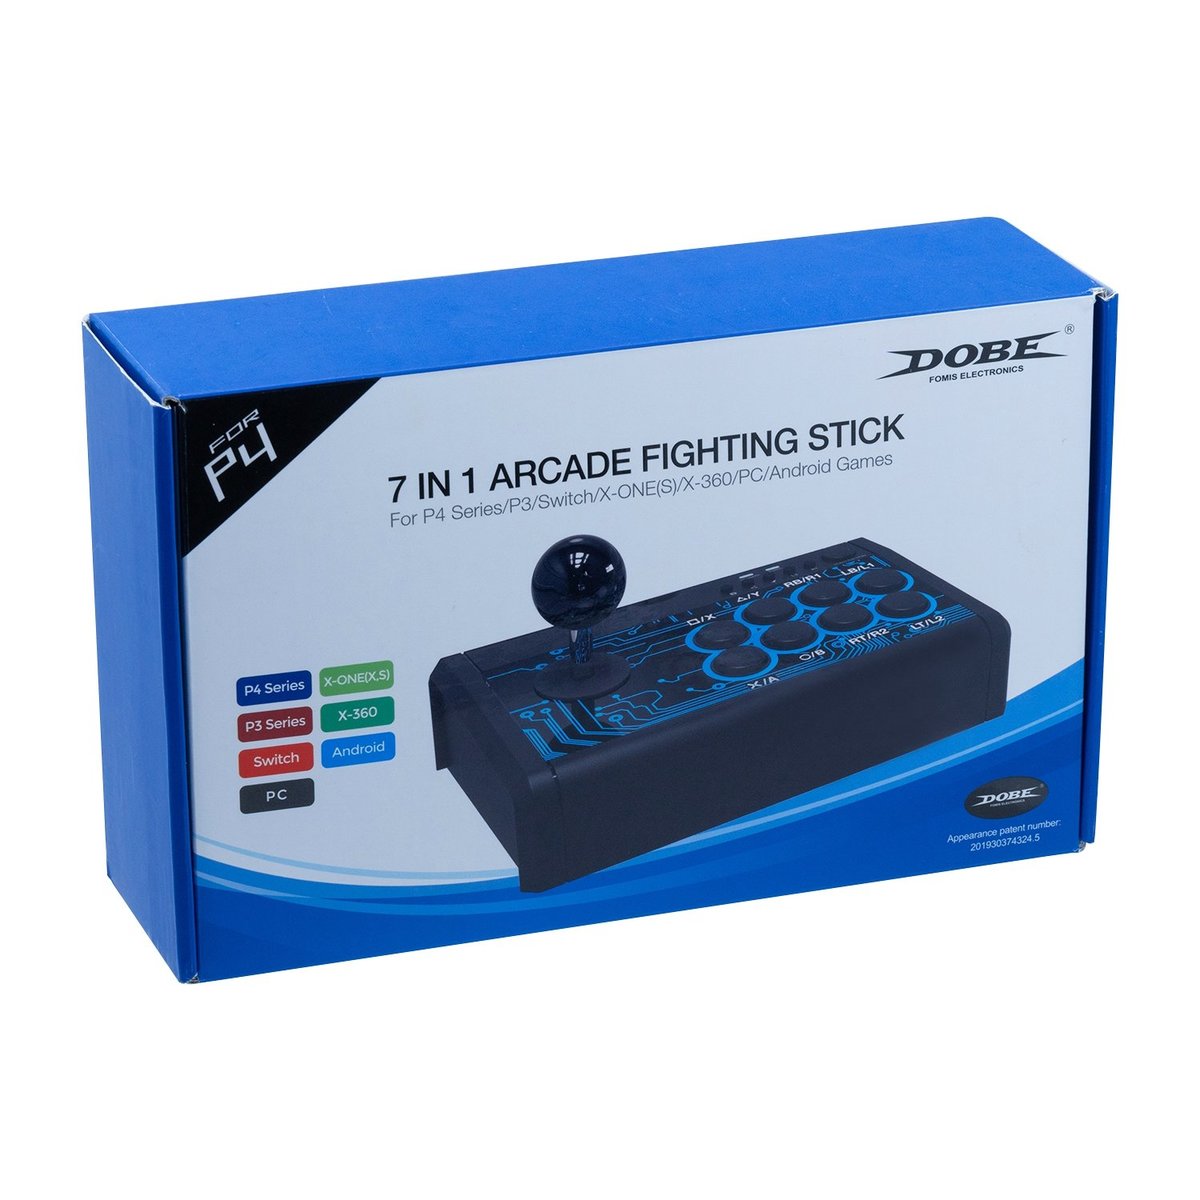 DOBE | In Mini Arcade Fighting Stick for PS4/PS3/Xbox One/Xbox 360/Nintendo Switch.Android/Windows PC | HKTVmall The Largest HK Shopping